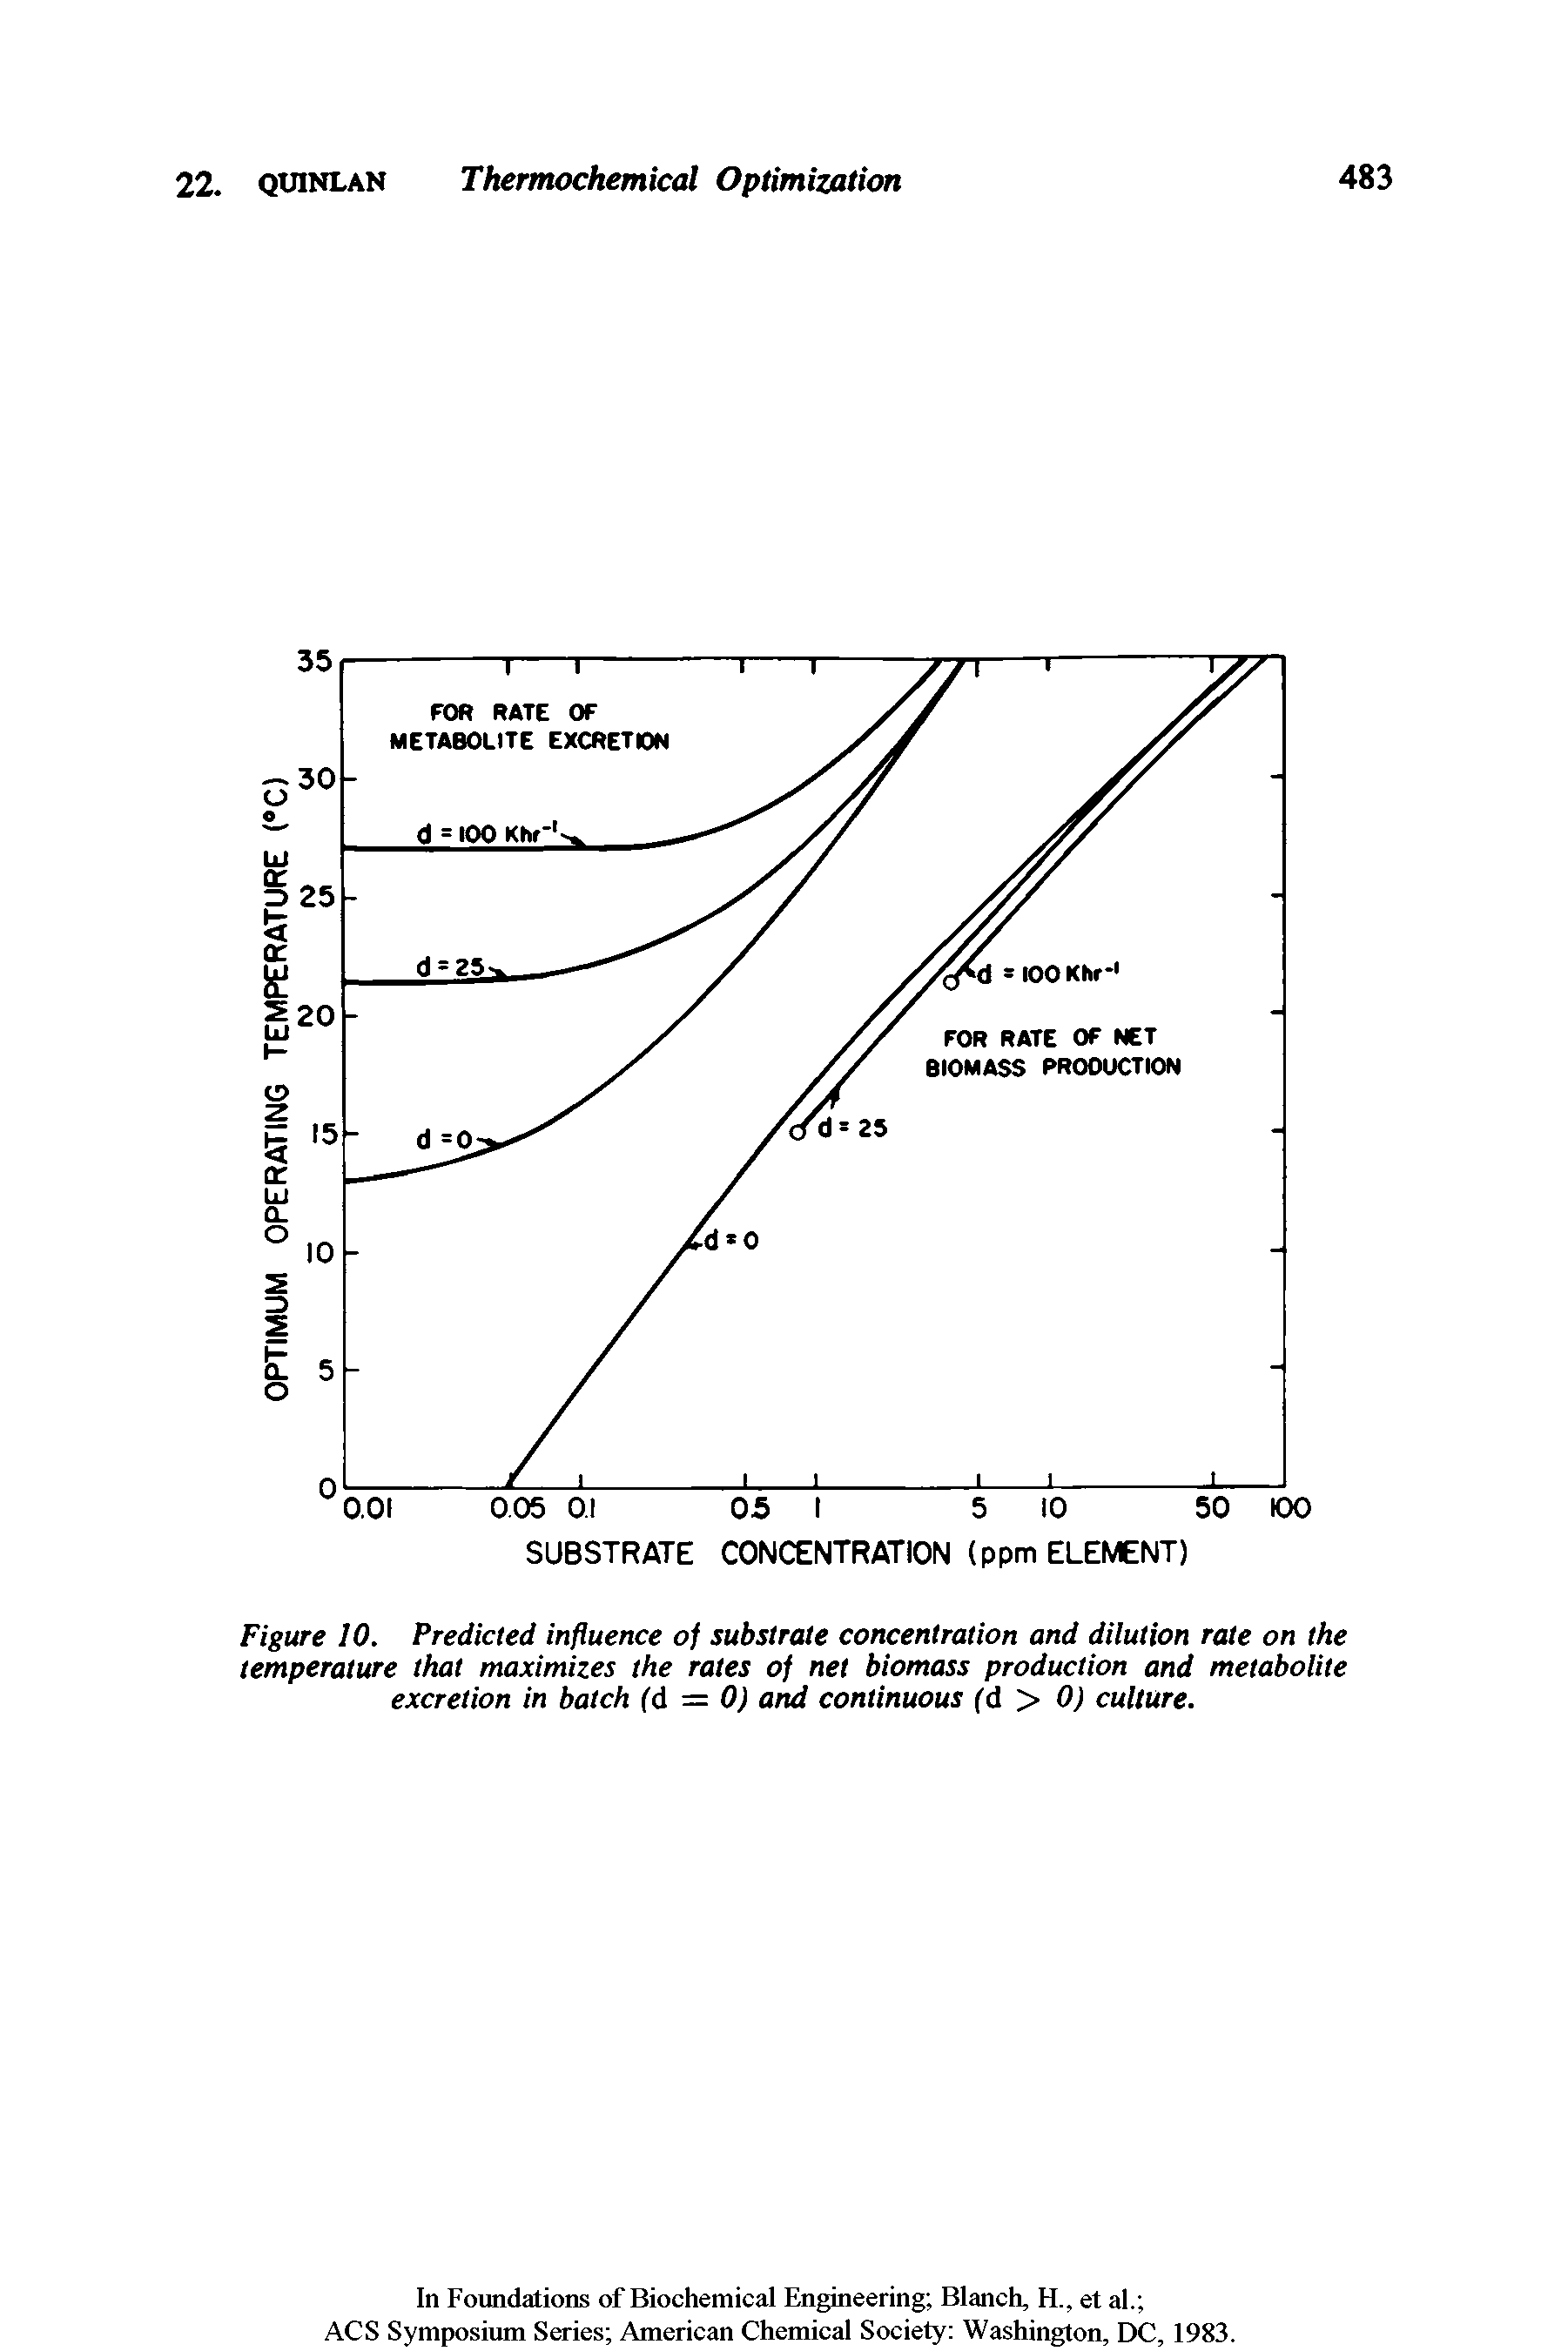 Figure 10. Predicted influence of substrate concentration and dilution rate on the temperature that maximizes the rates of net biomass production and metabolite excretion in batch (d = 0) and continuous (d > 0) culture.